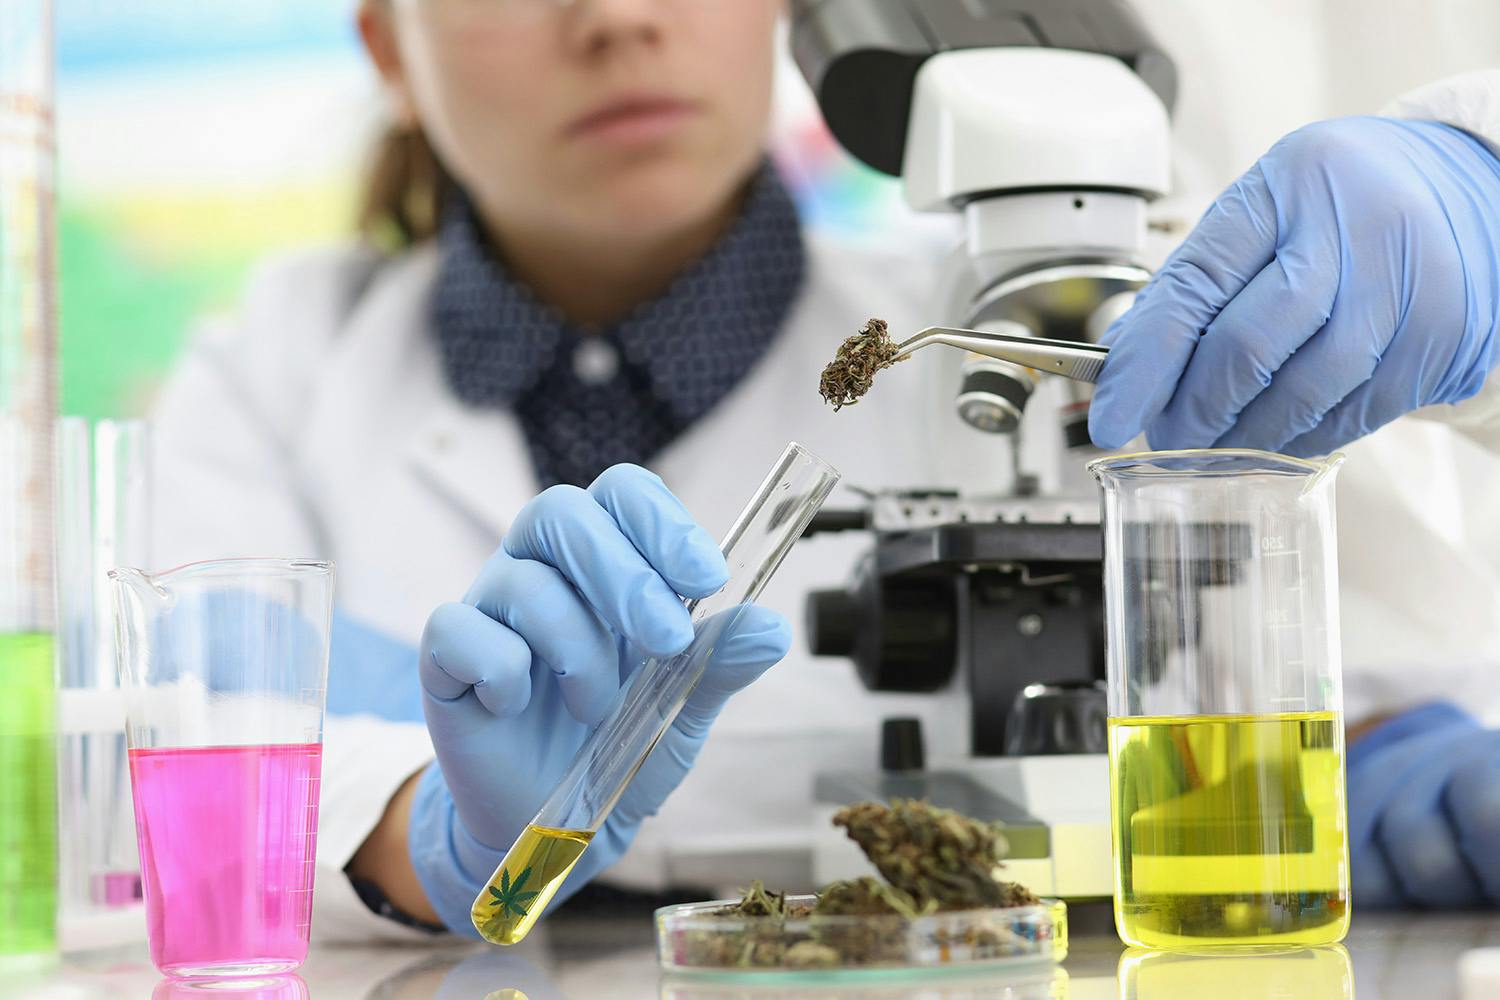 Woman testing THC strains in lab environment